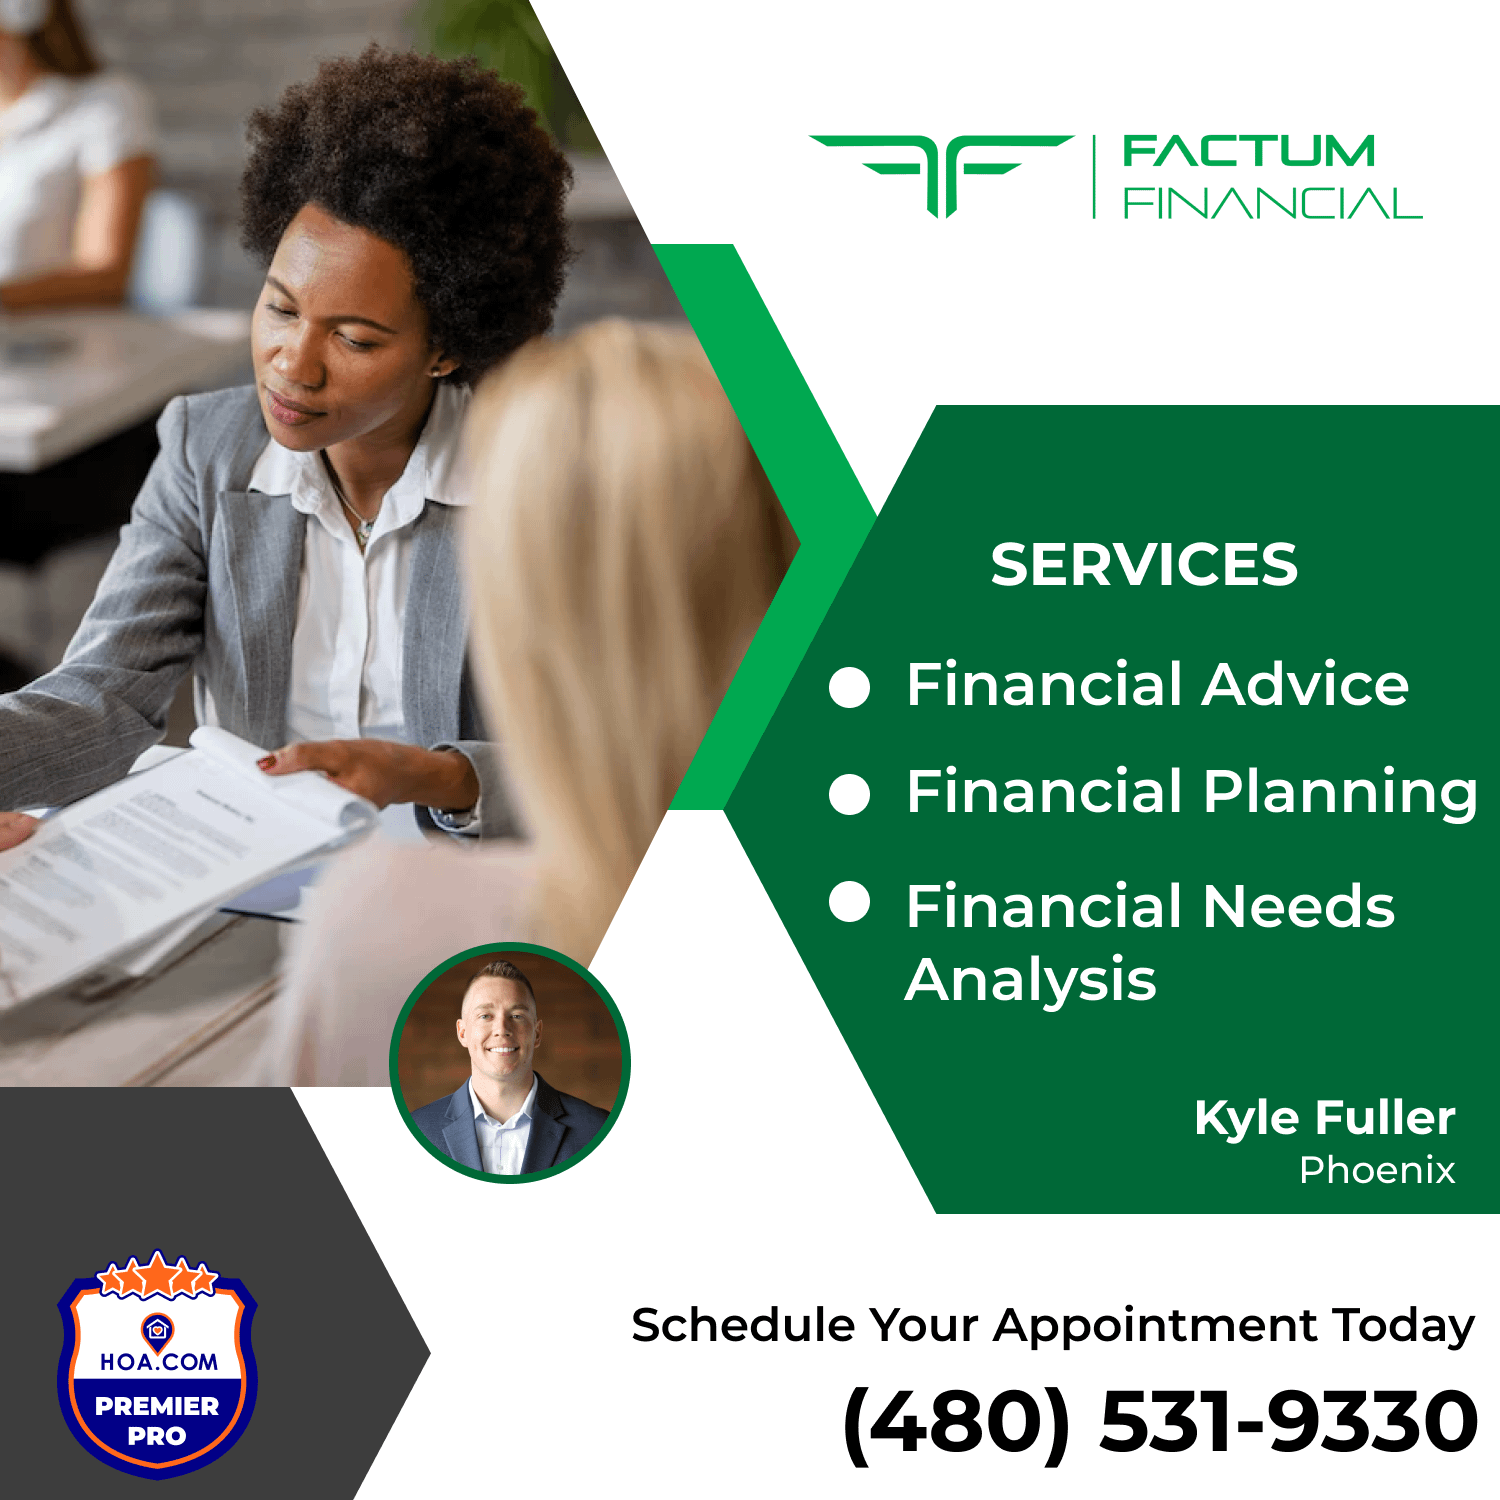 Services from Factum Financial